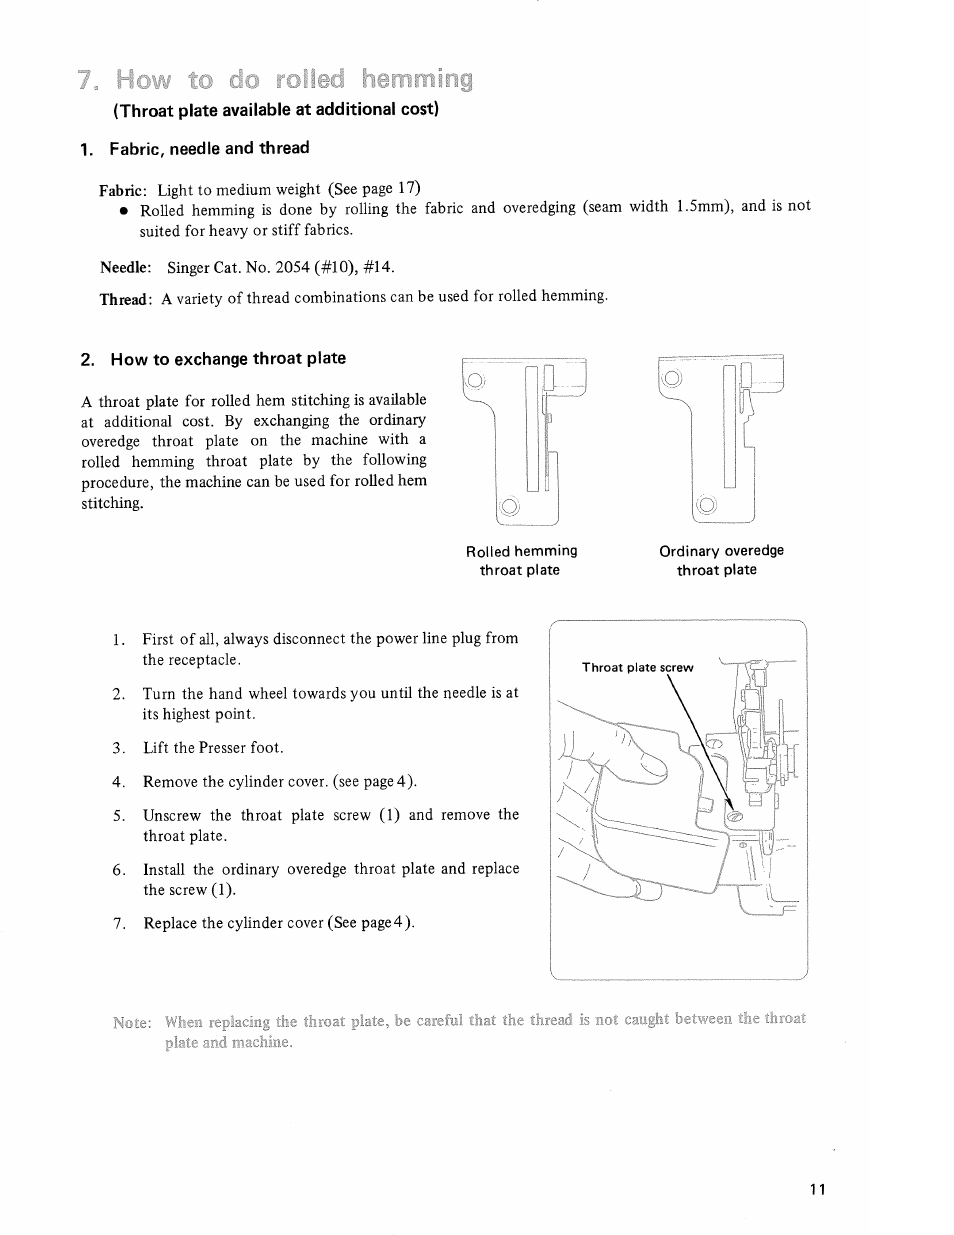 Rolled hemming throat plate, Ordinary overedge throat plate, Be ~ c : i | SINGER 14U32A Ultralock User Manual | Page 13 / 24